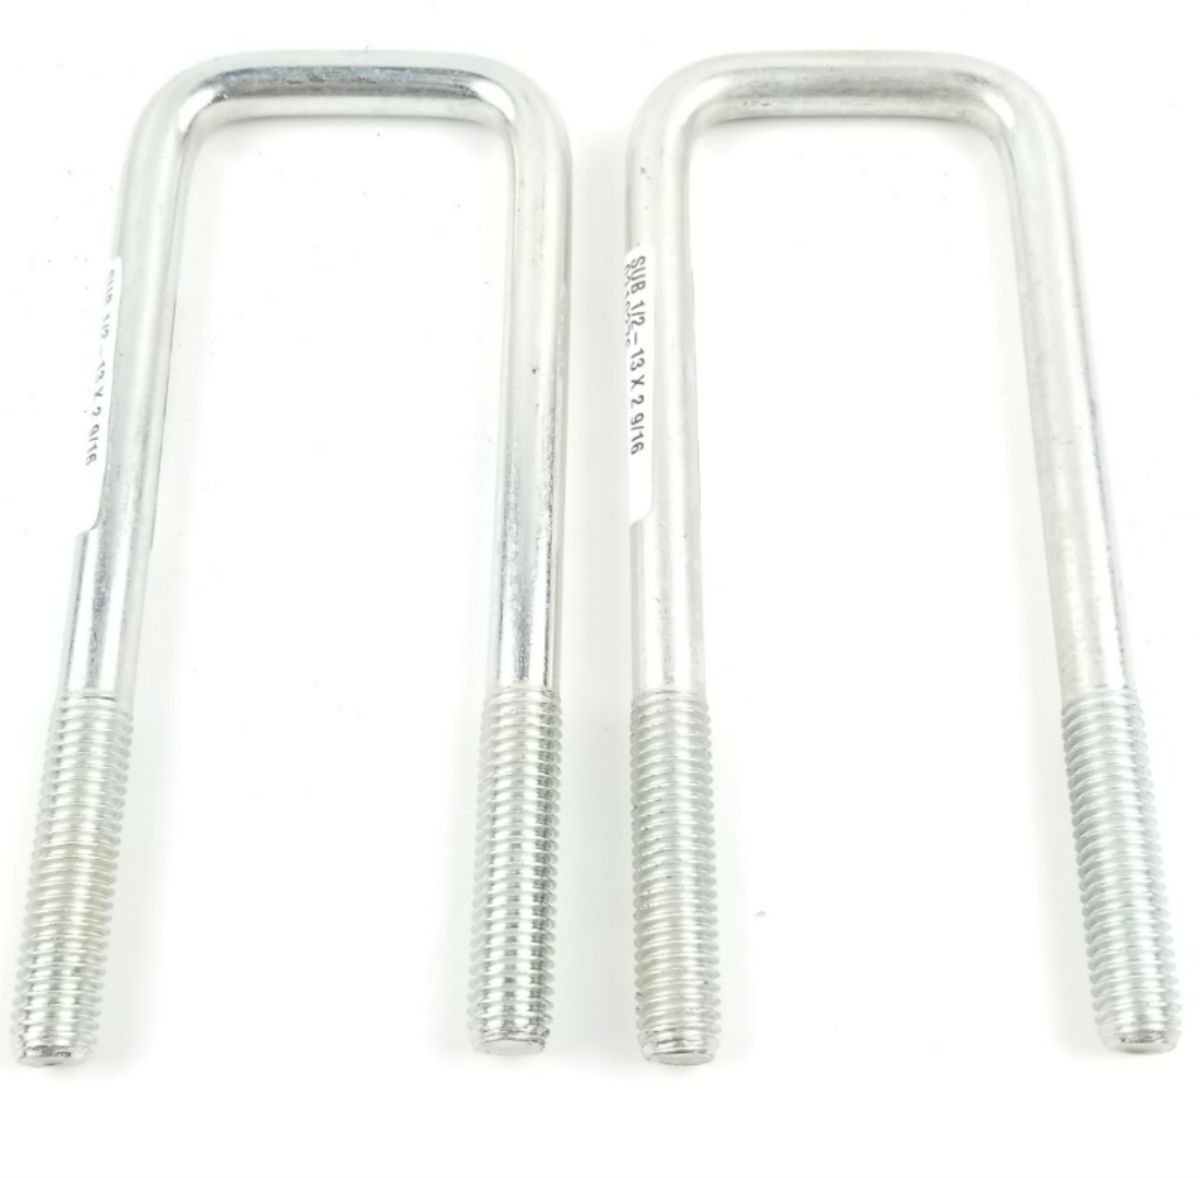 Shorelander 0310276 Square Submersible U-Bolt - 1/2 Inches x 2-1/8 Inches x 6-1/2 Inches - 2 Pack